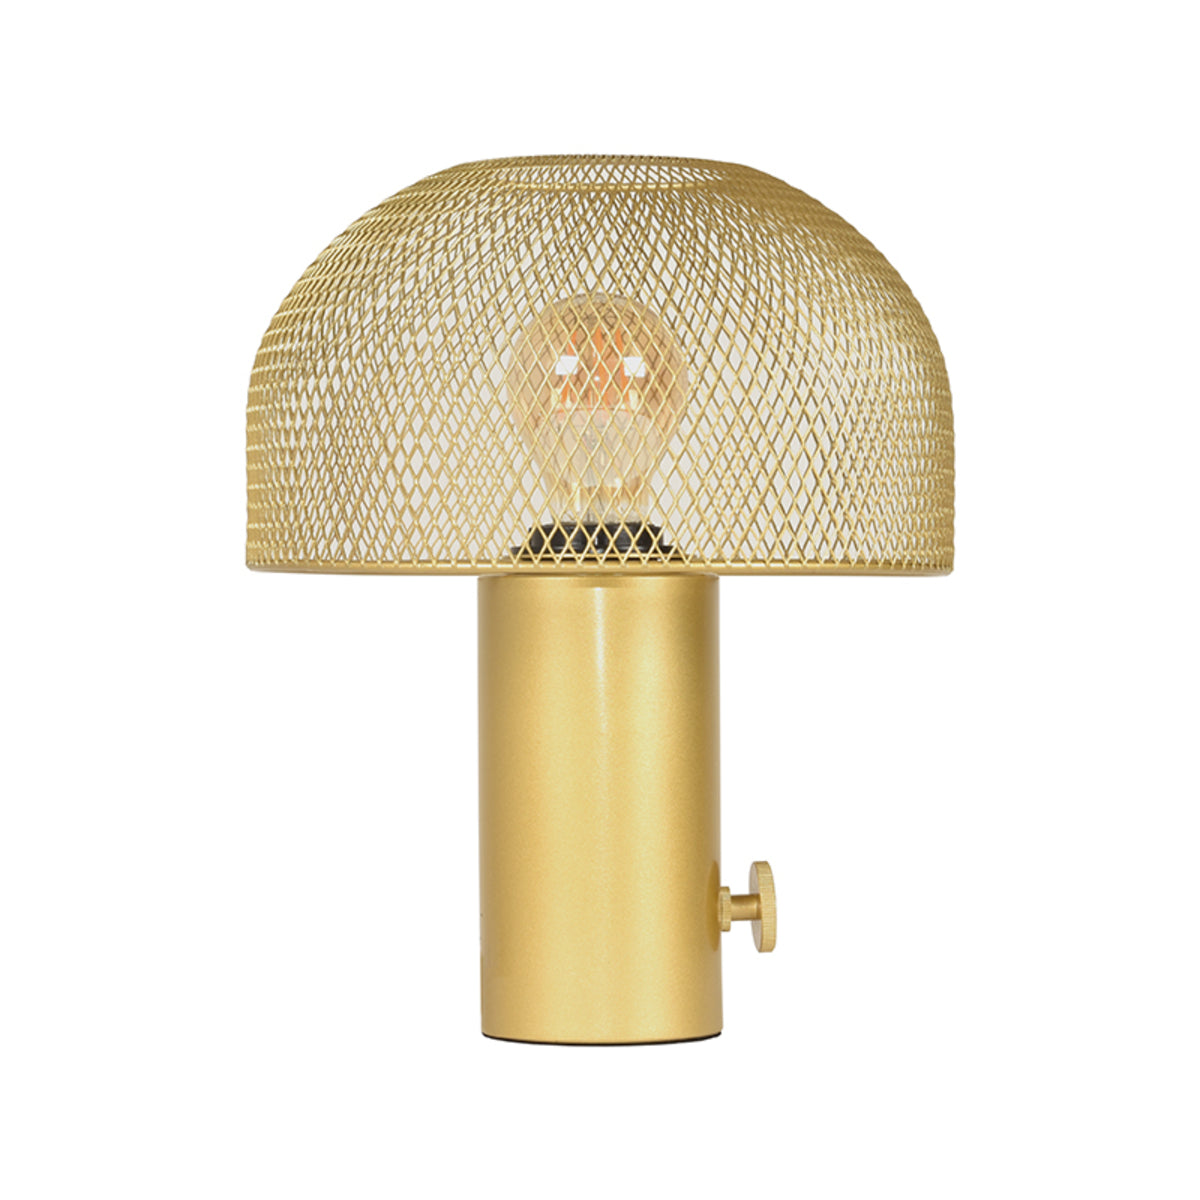 LABEL51 Table lamp Fungo - Gold - Metal